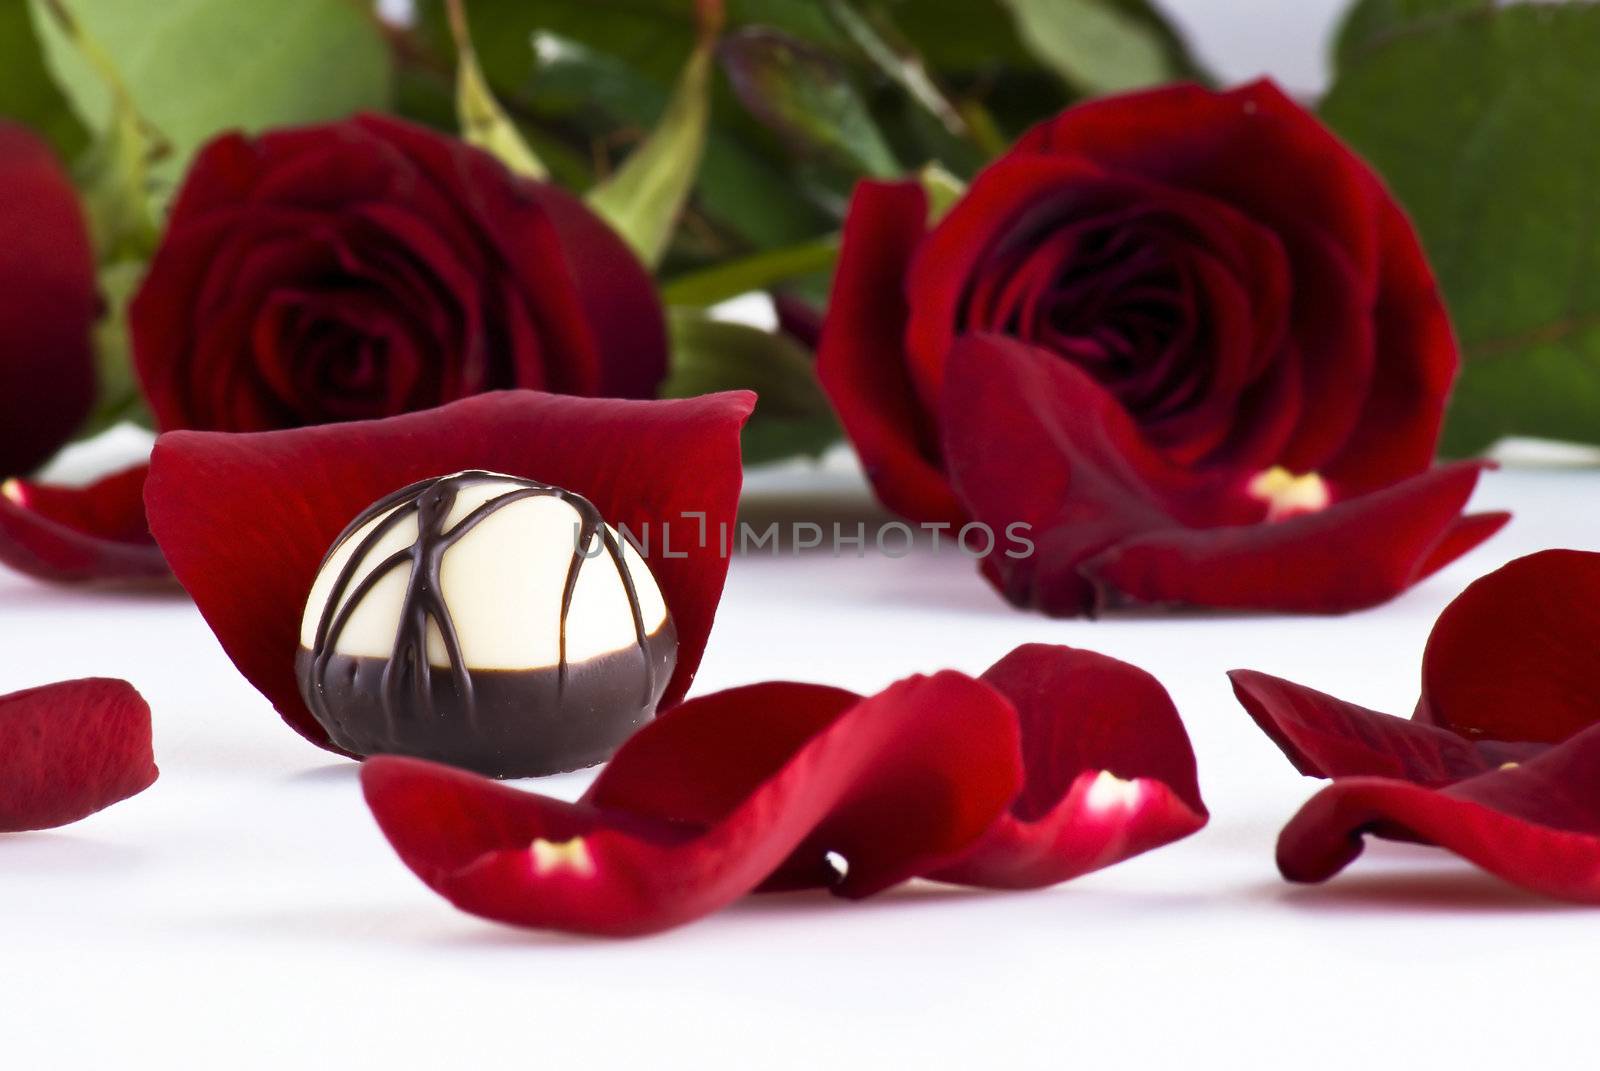 Luxury chocolate on rose petal and roses